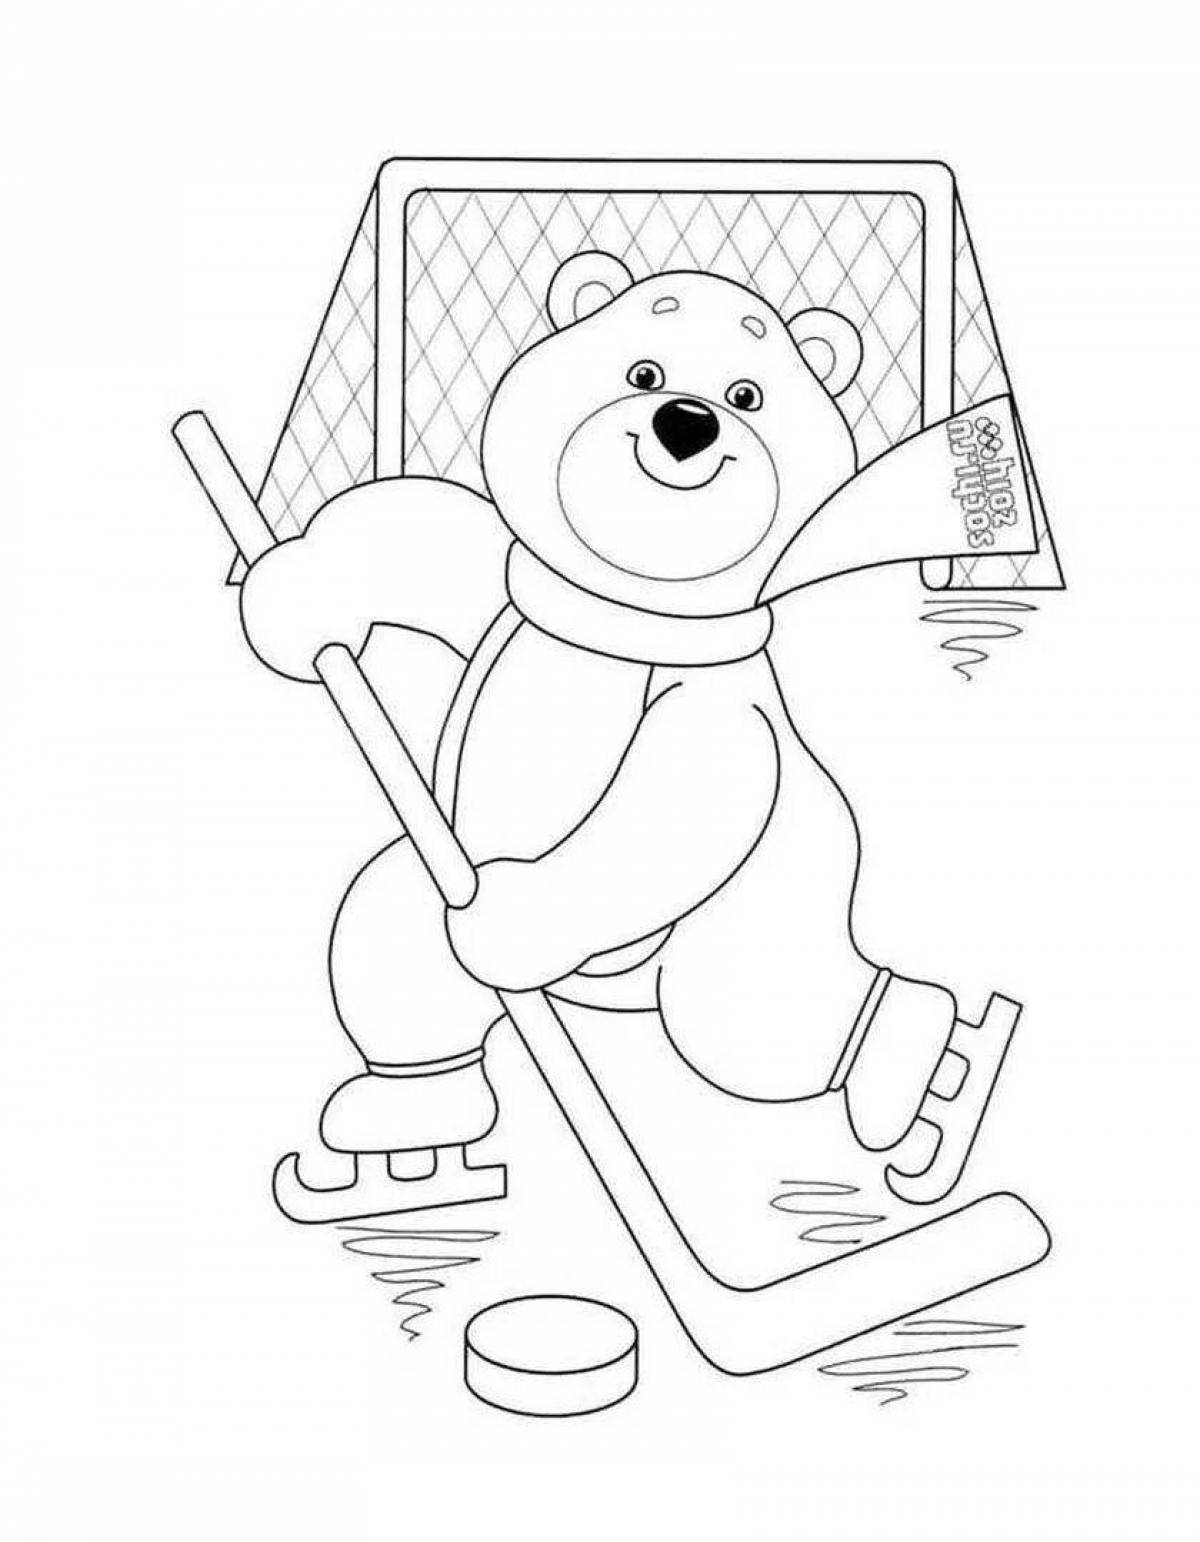 Fairy olympic bear coloring book for kids